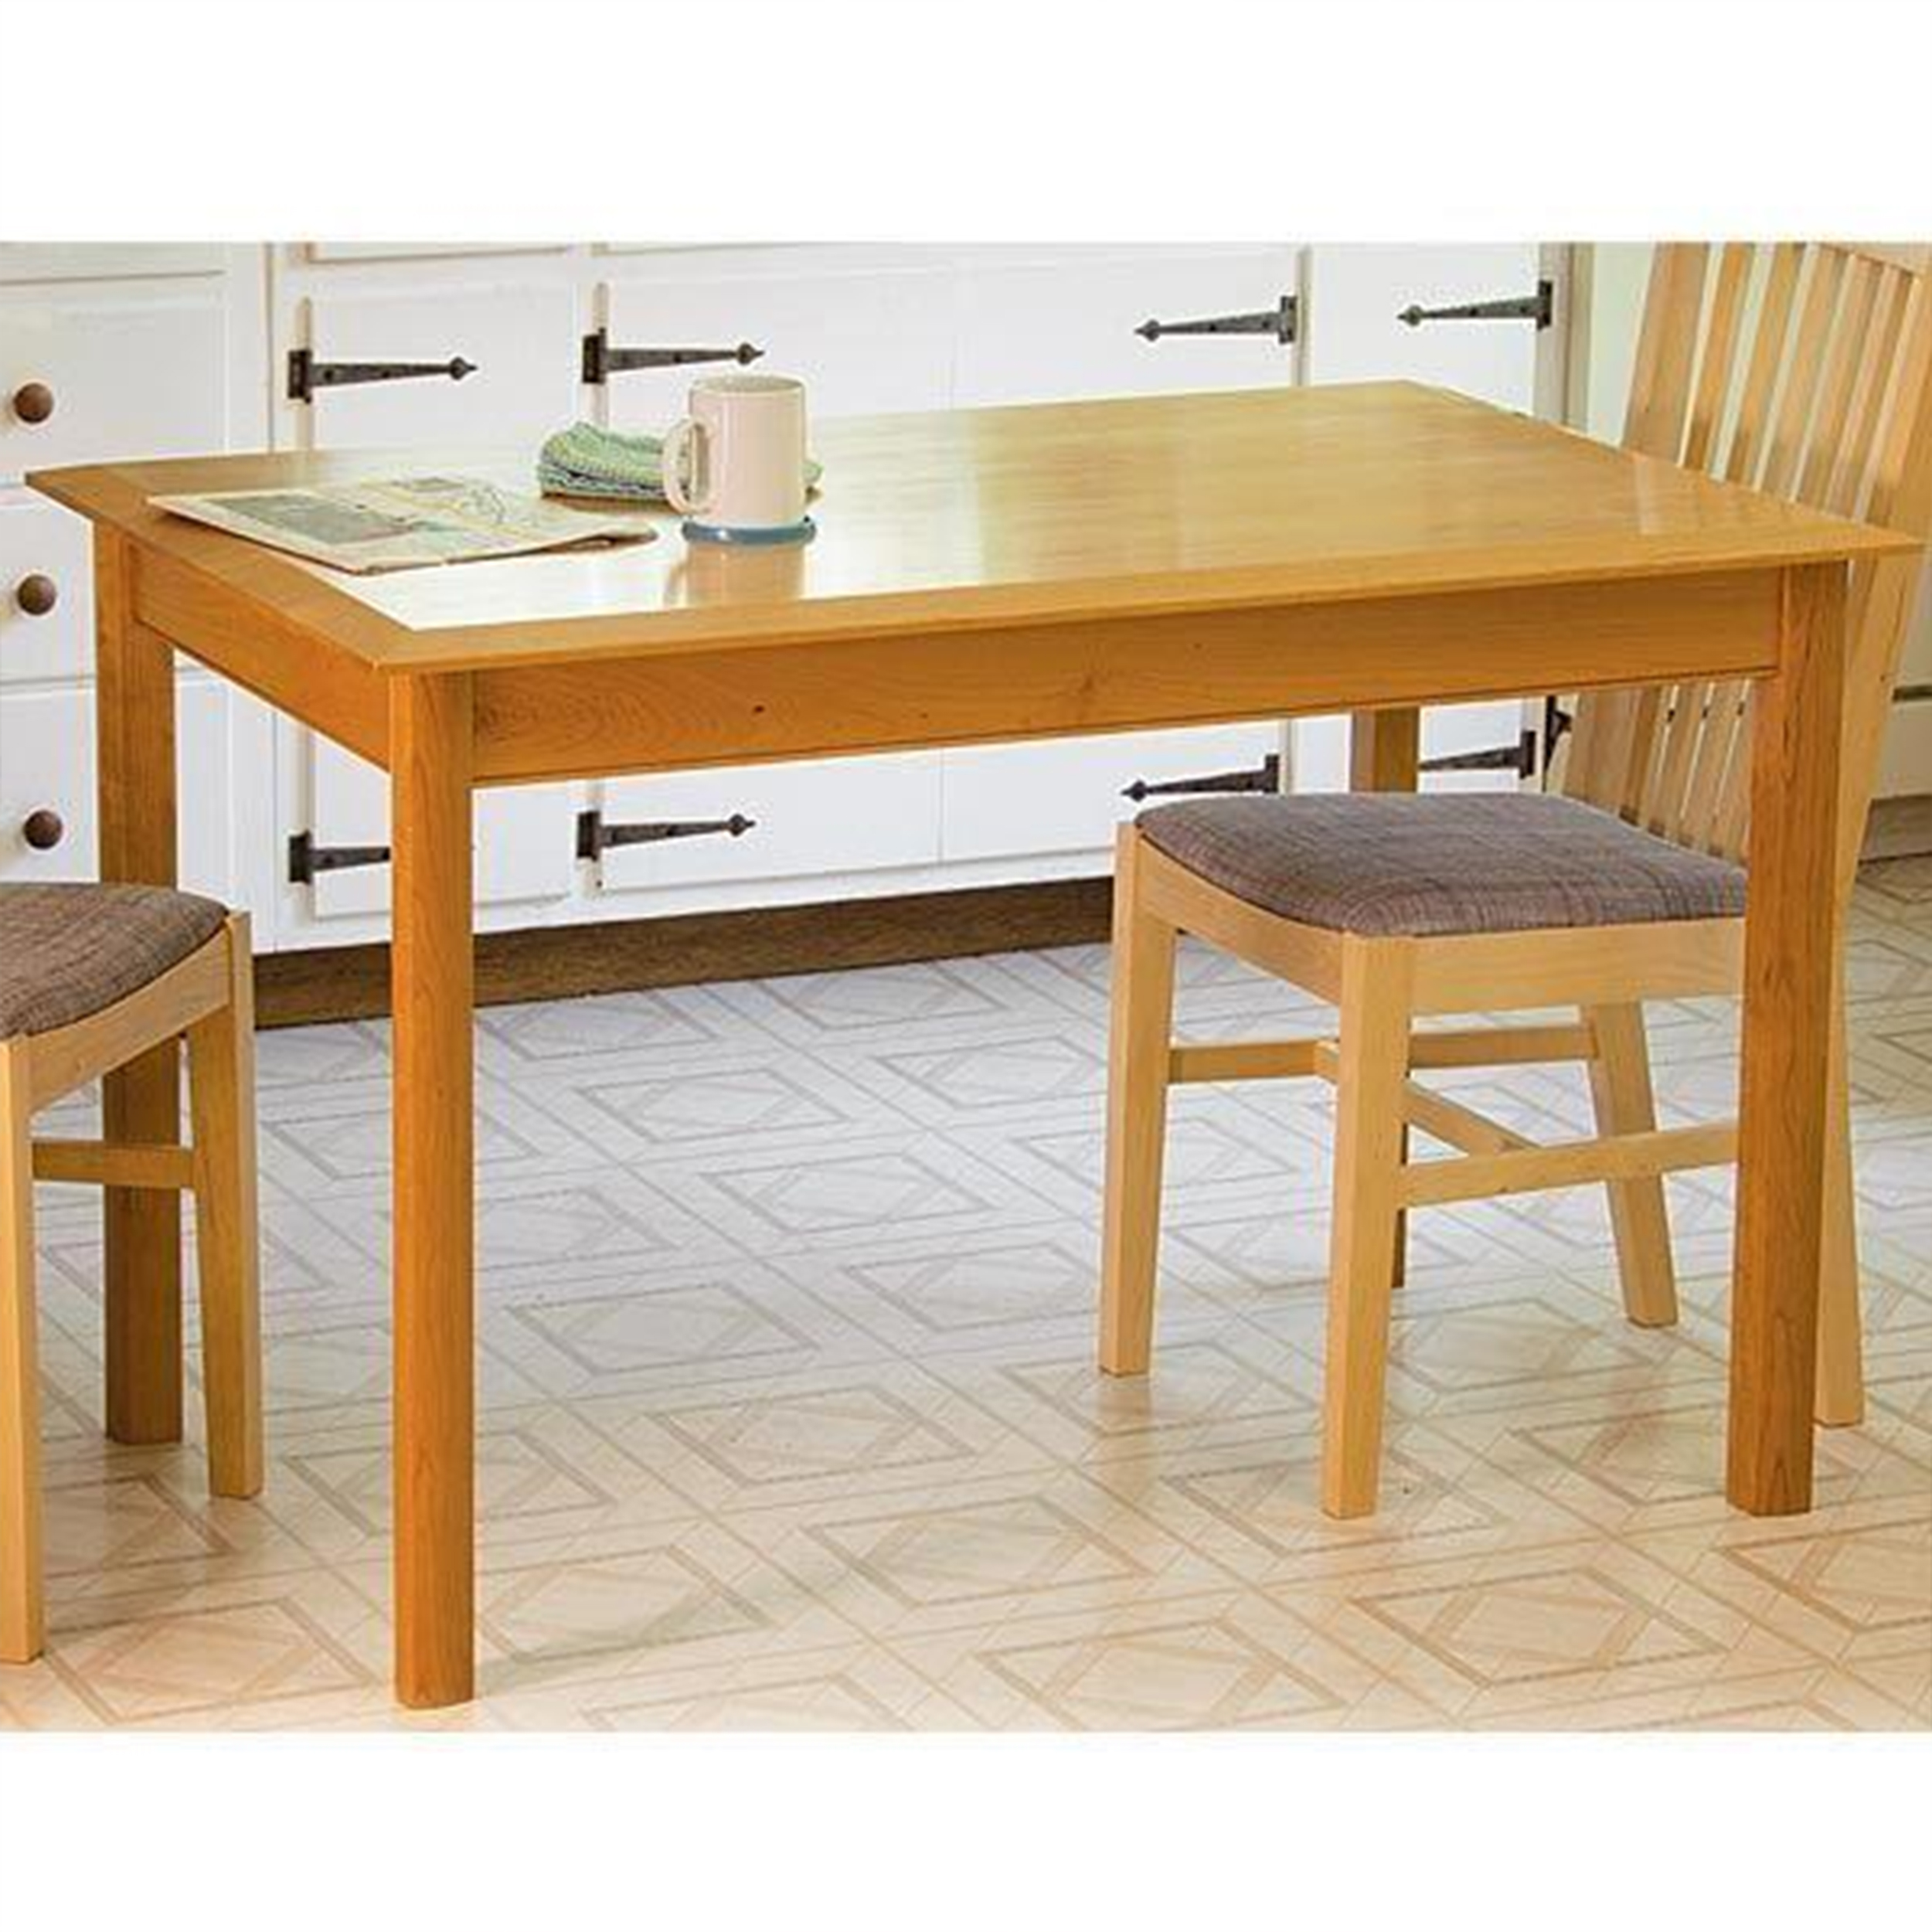 Compact Comfortable Kitchen Table - Paper Plan